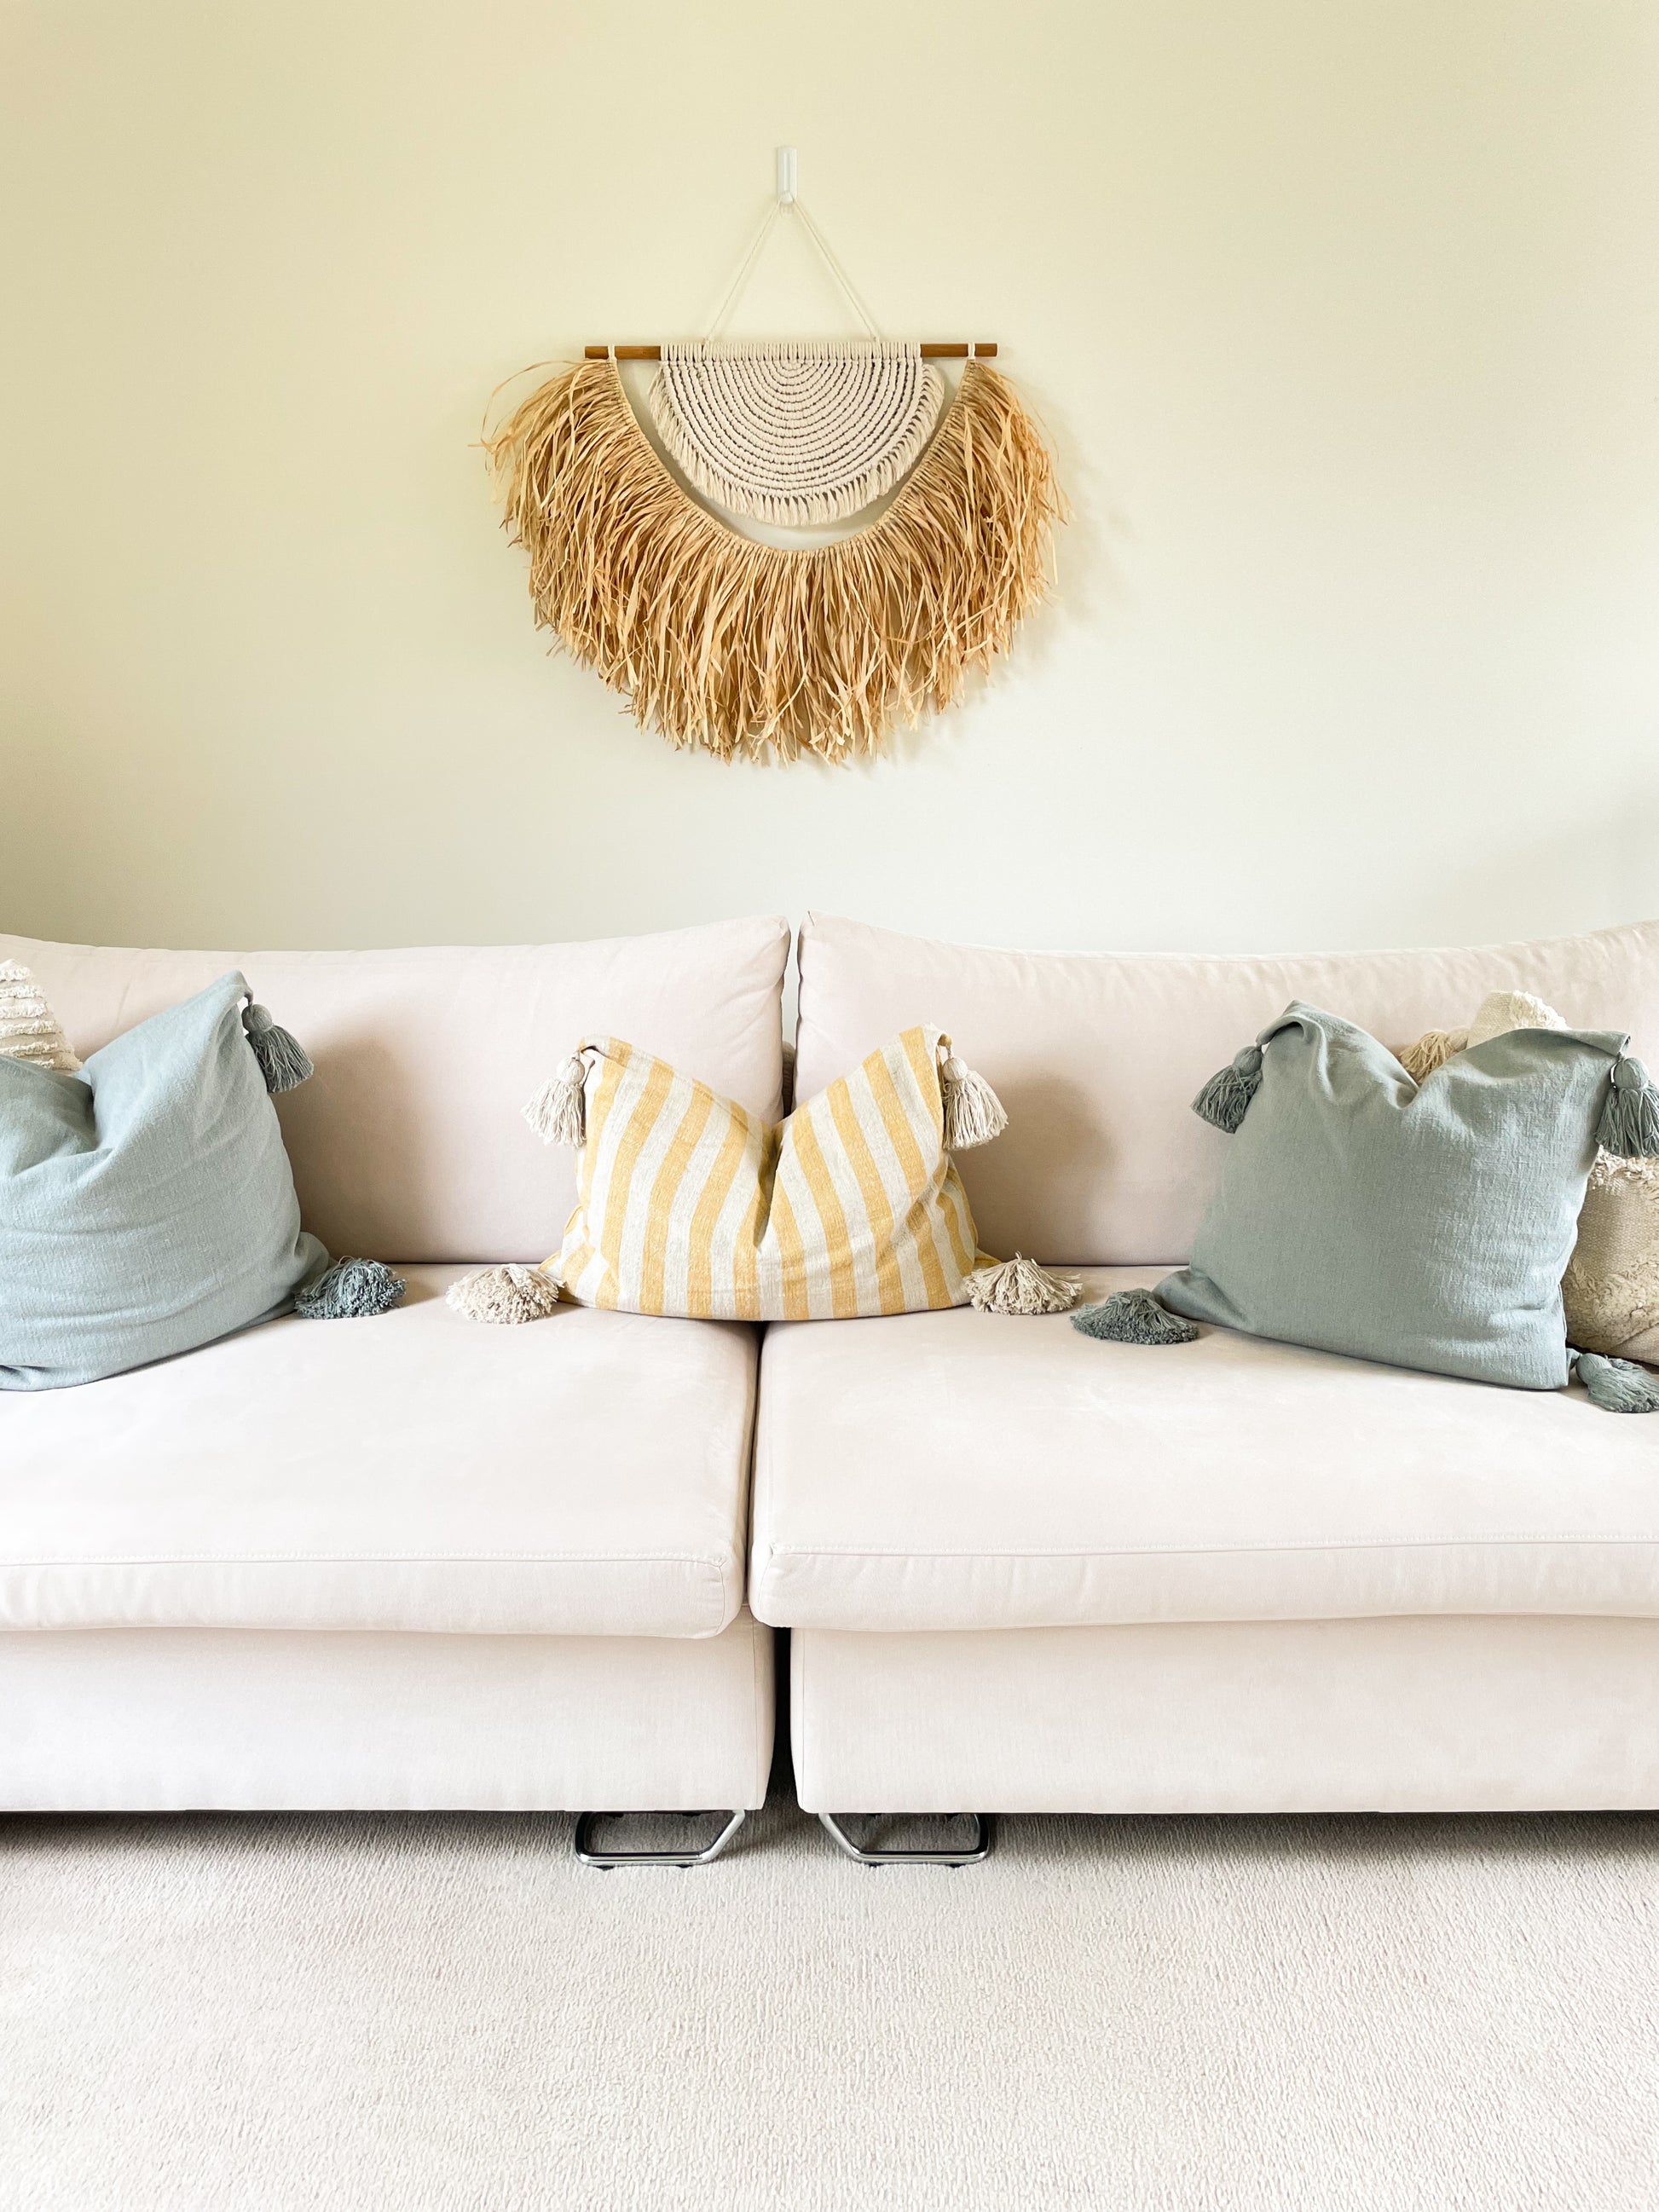 Large macrame and raffia wall hanging hanged on a wall above a large sofa styled with coastal style cushions